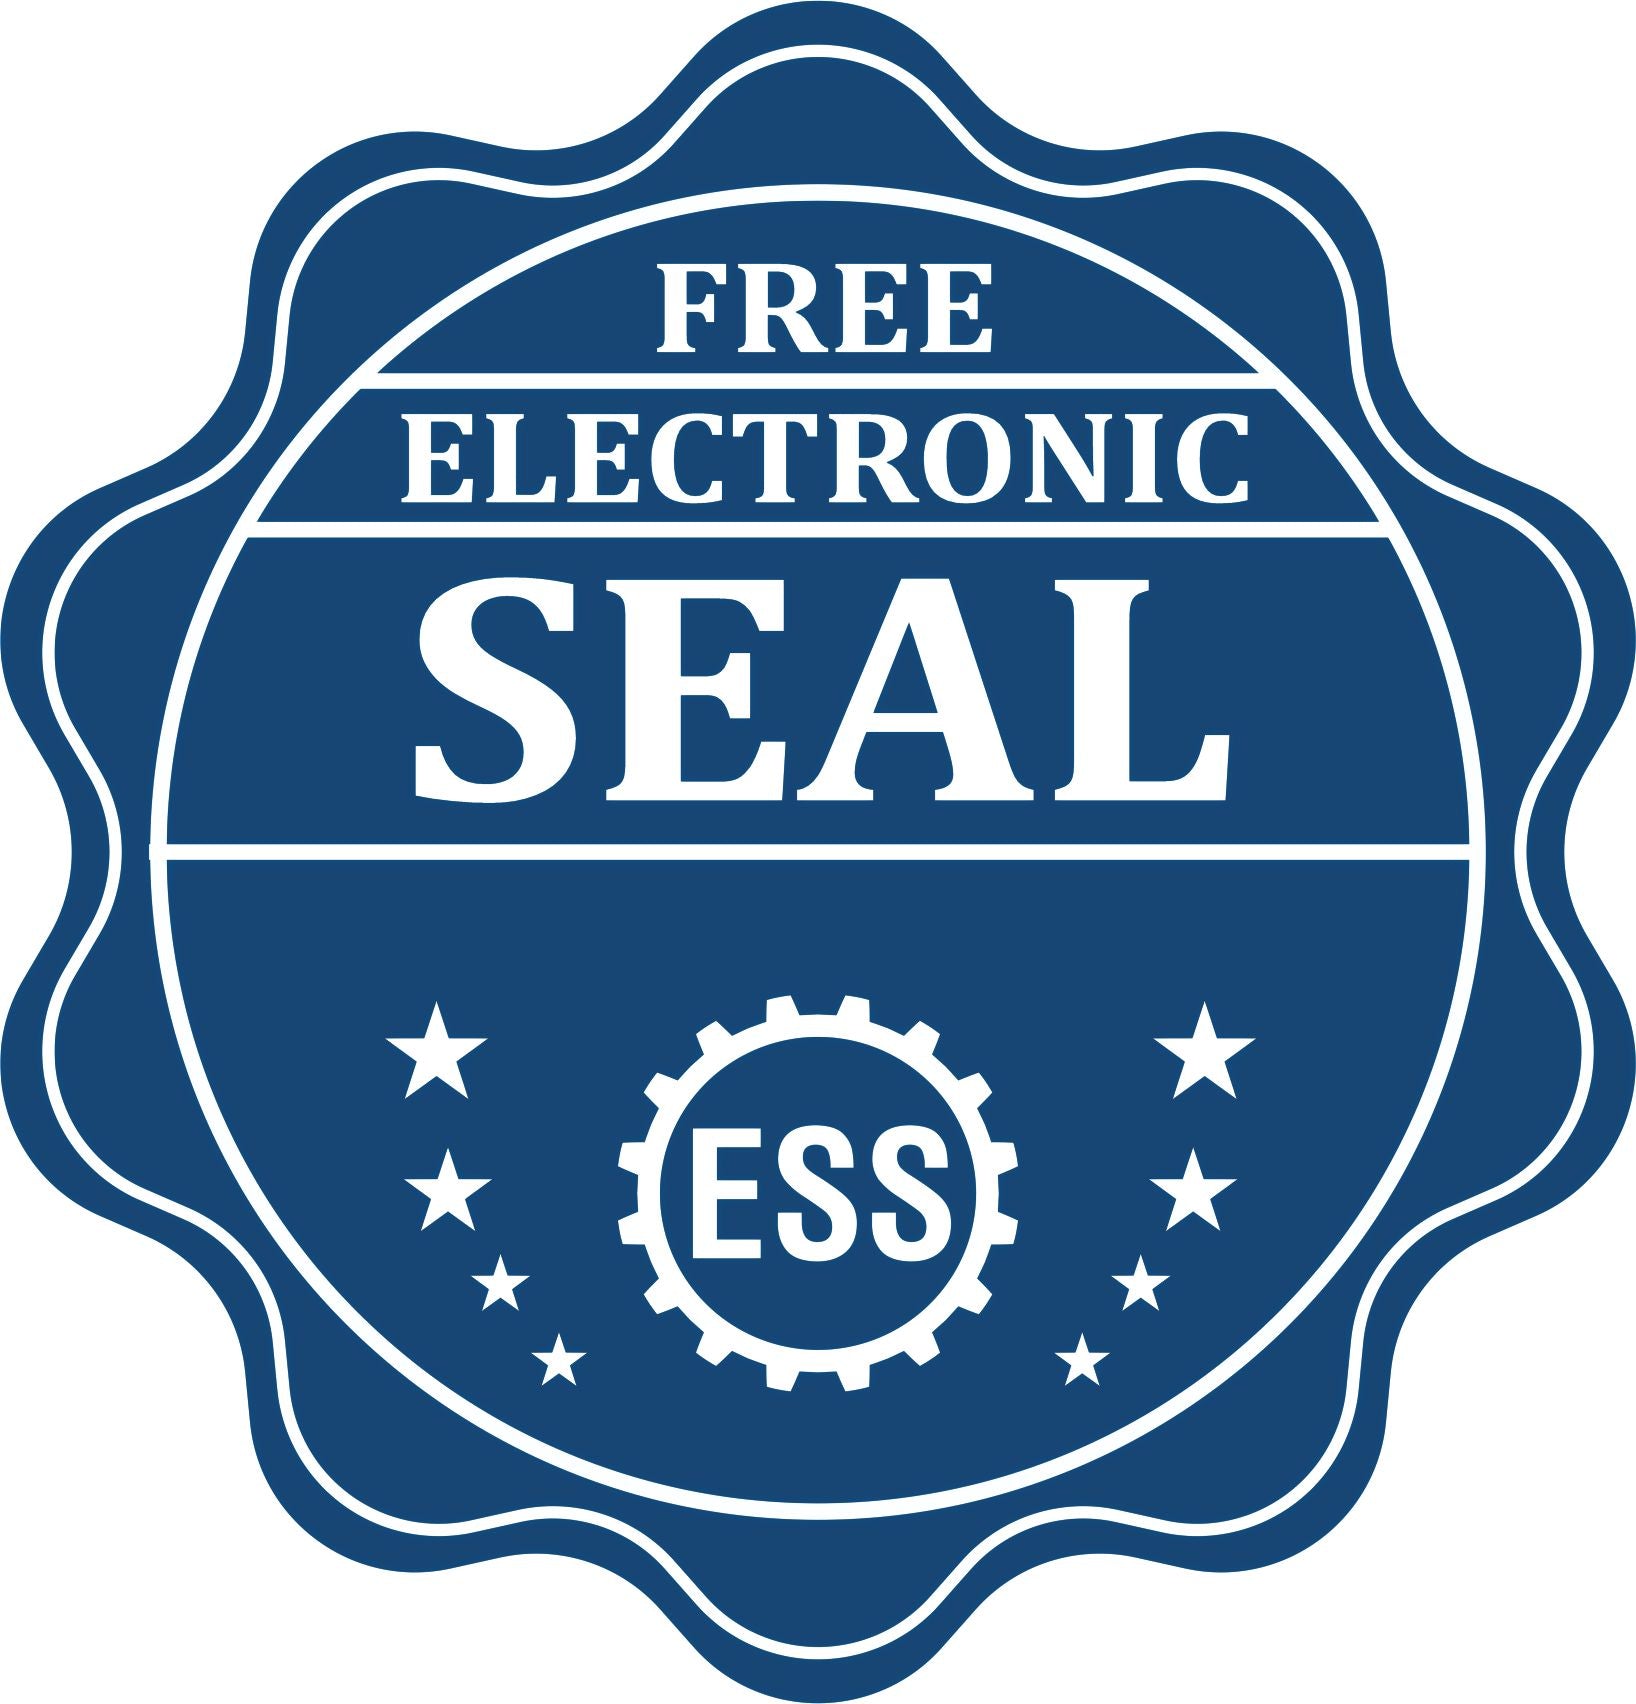 A badge showing a free electronic seal for the Handheld Indiana Professional Geologist Embosser with stars and the ESS gear on the emblem.